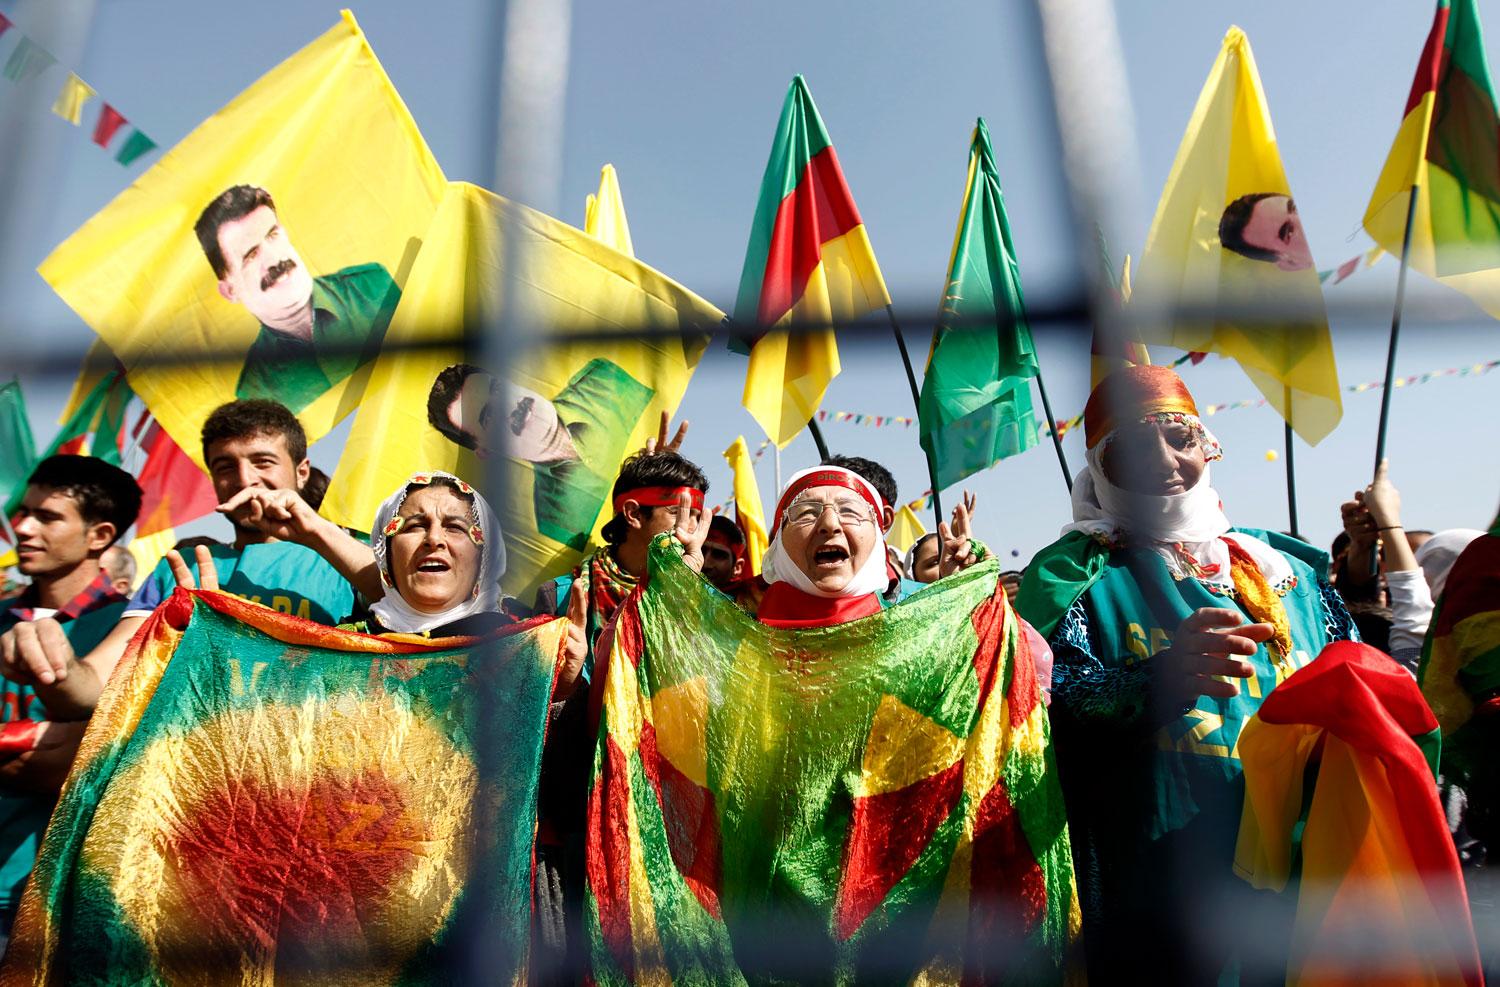 protesters holding Kurdish and PKK flags, banners